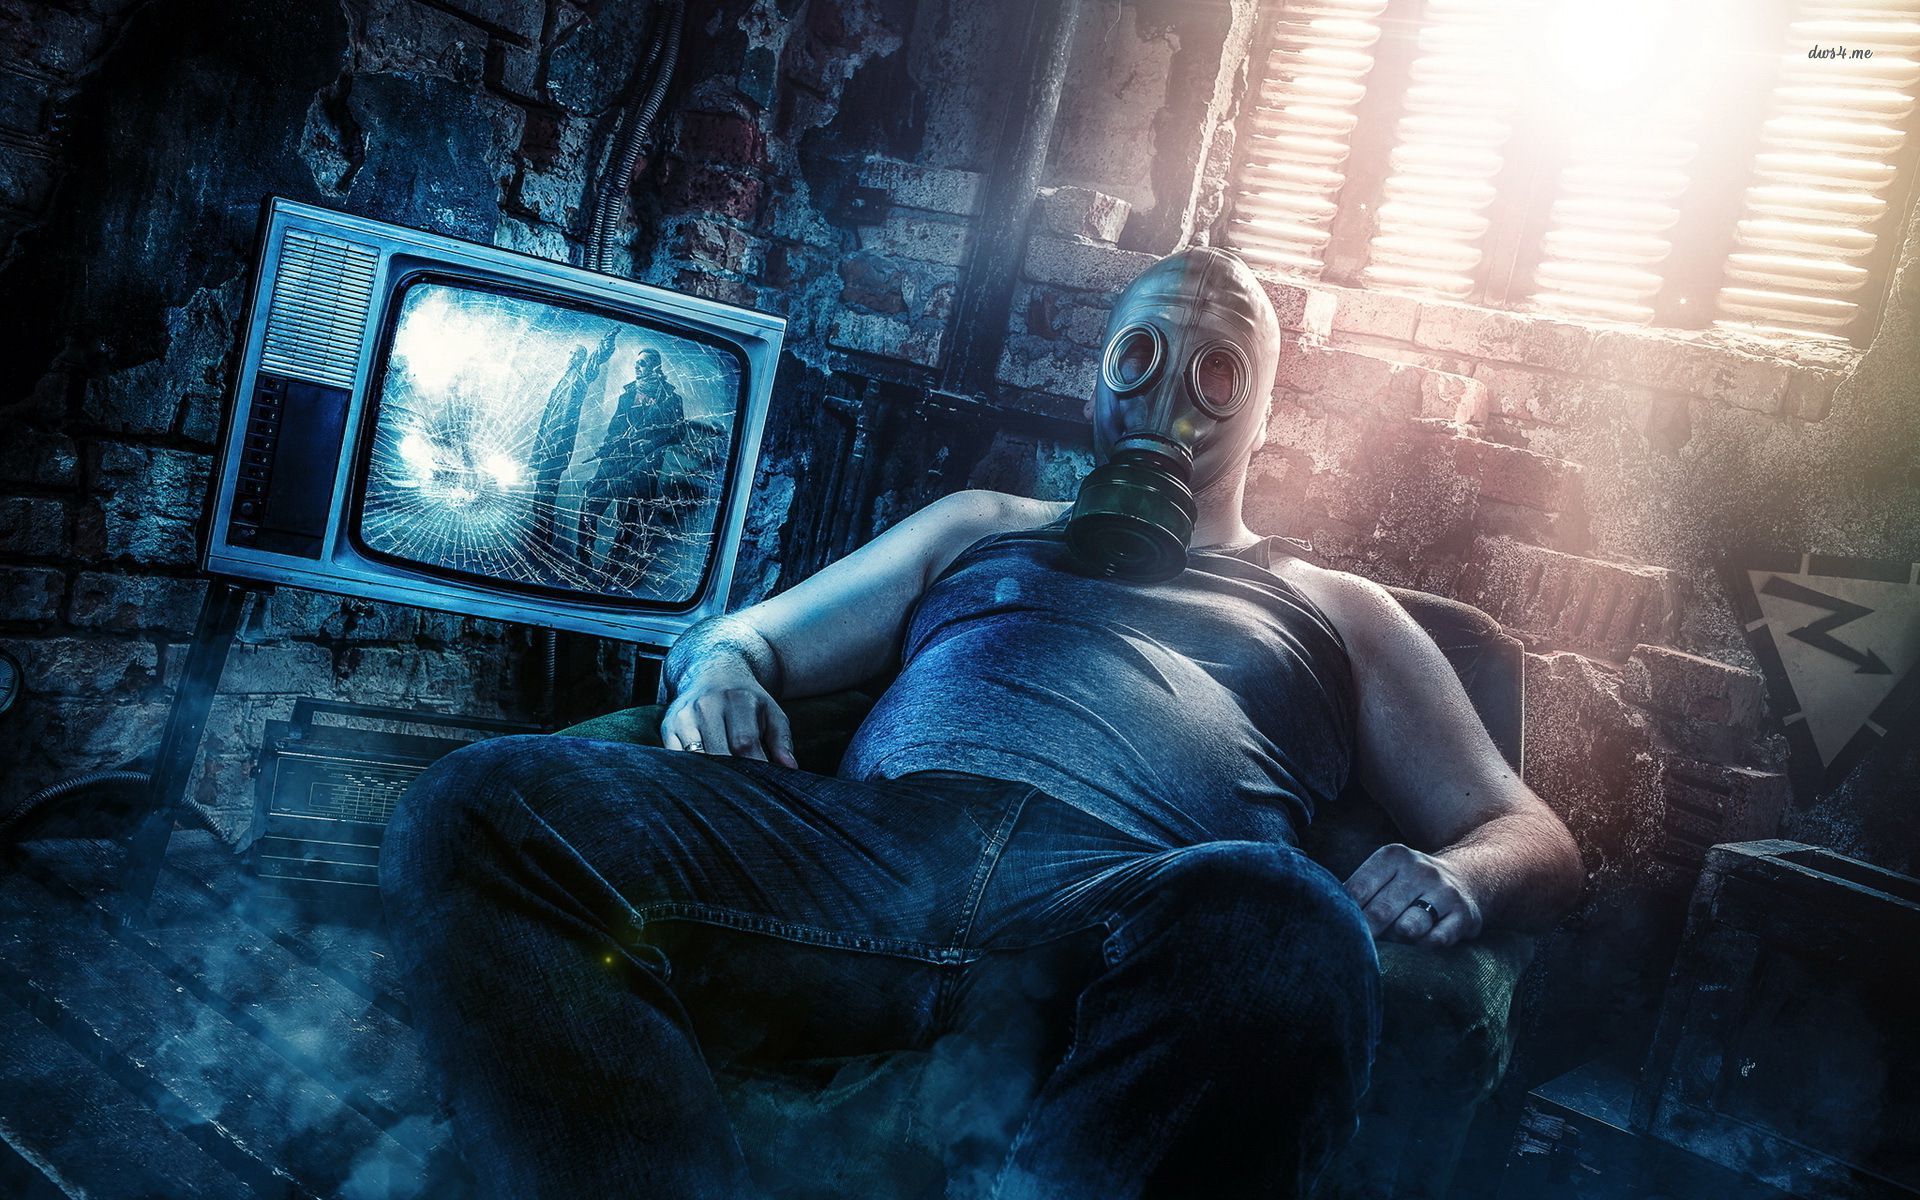 Sitting with a gas mask wallpaper - Digital Art wallpapers - #17002